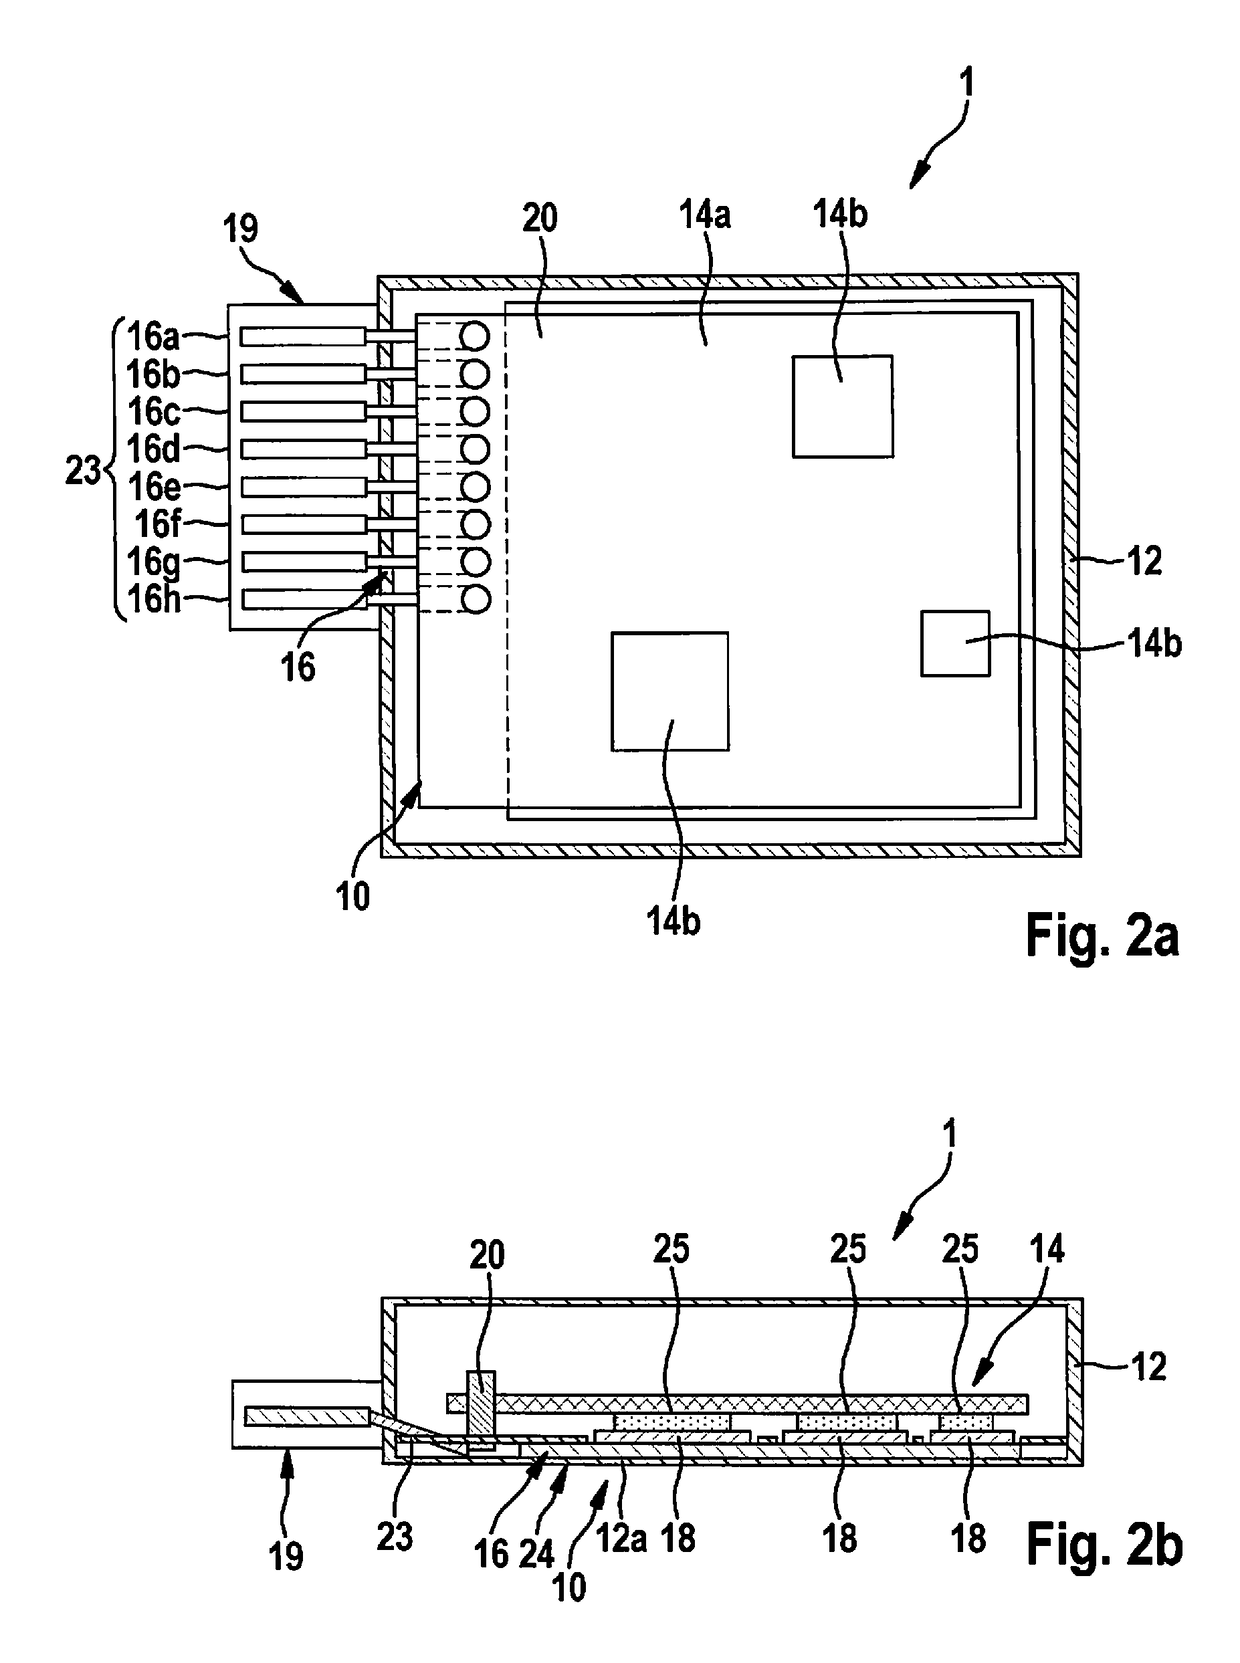 Electronic module including a device for dissipating heat generated by a semiconductor unit situated in a plastic housing and method for manufacturing an electronic module